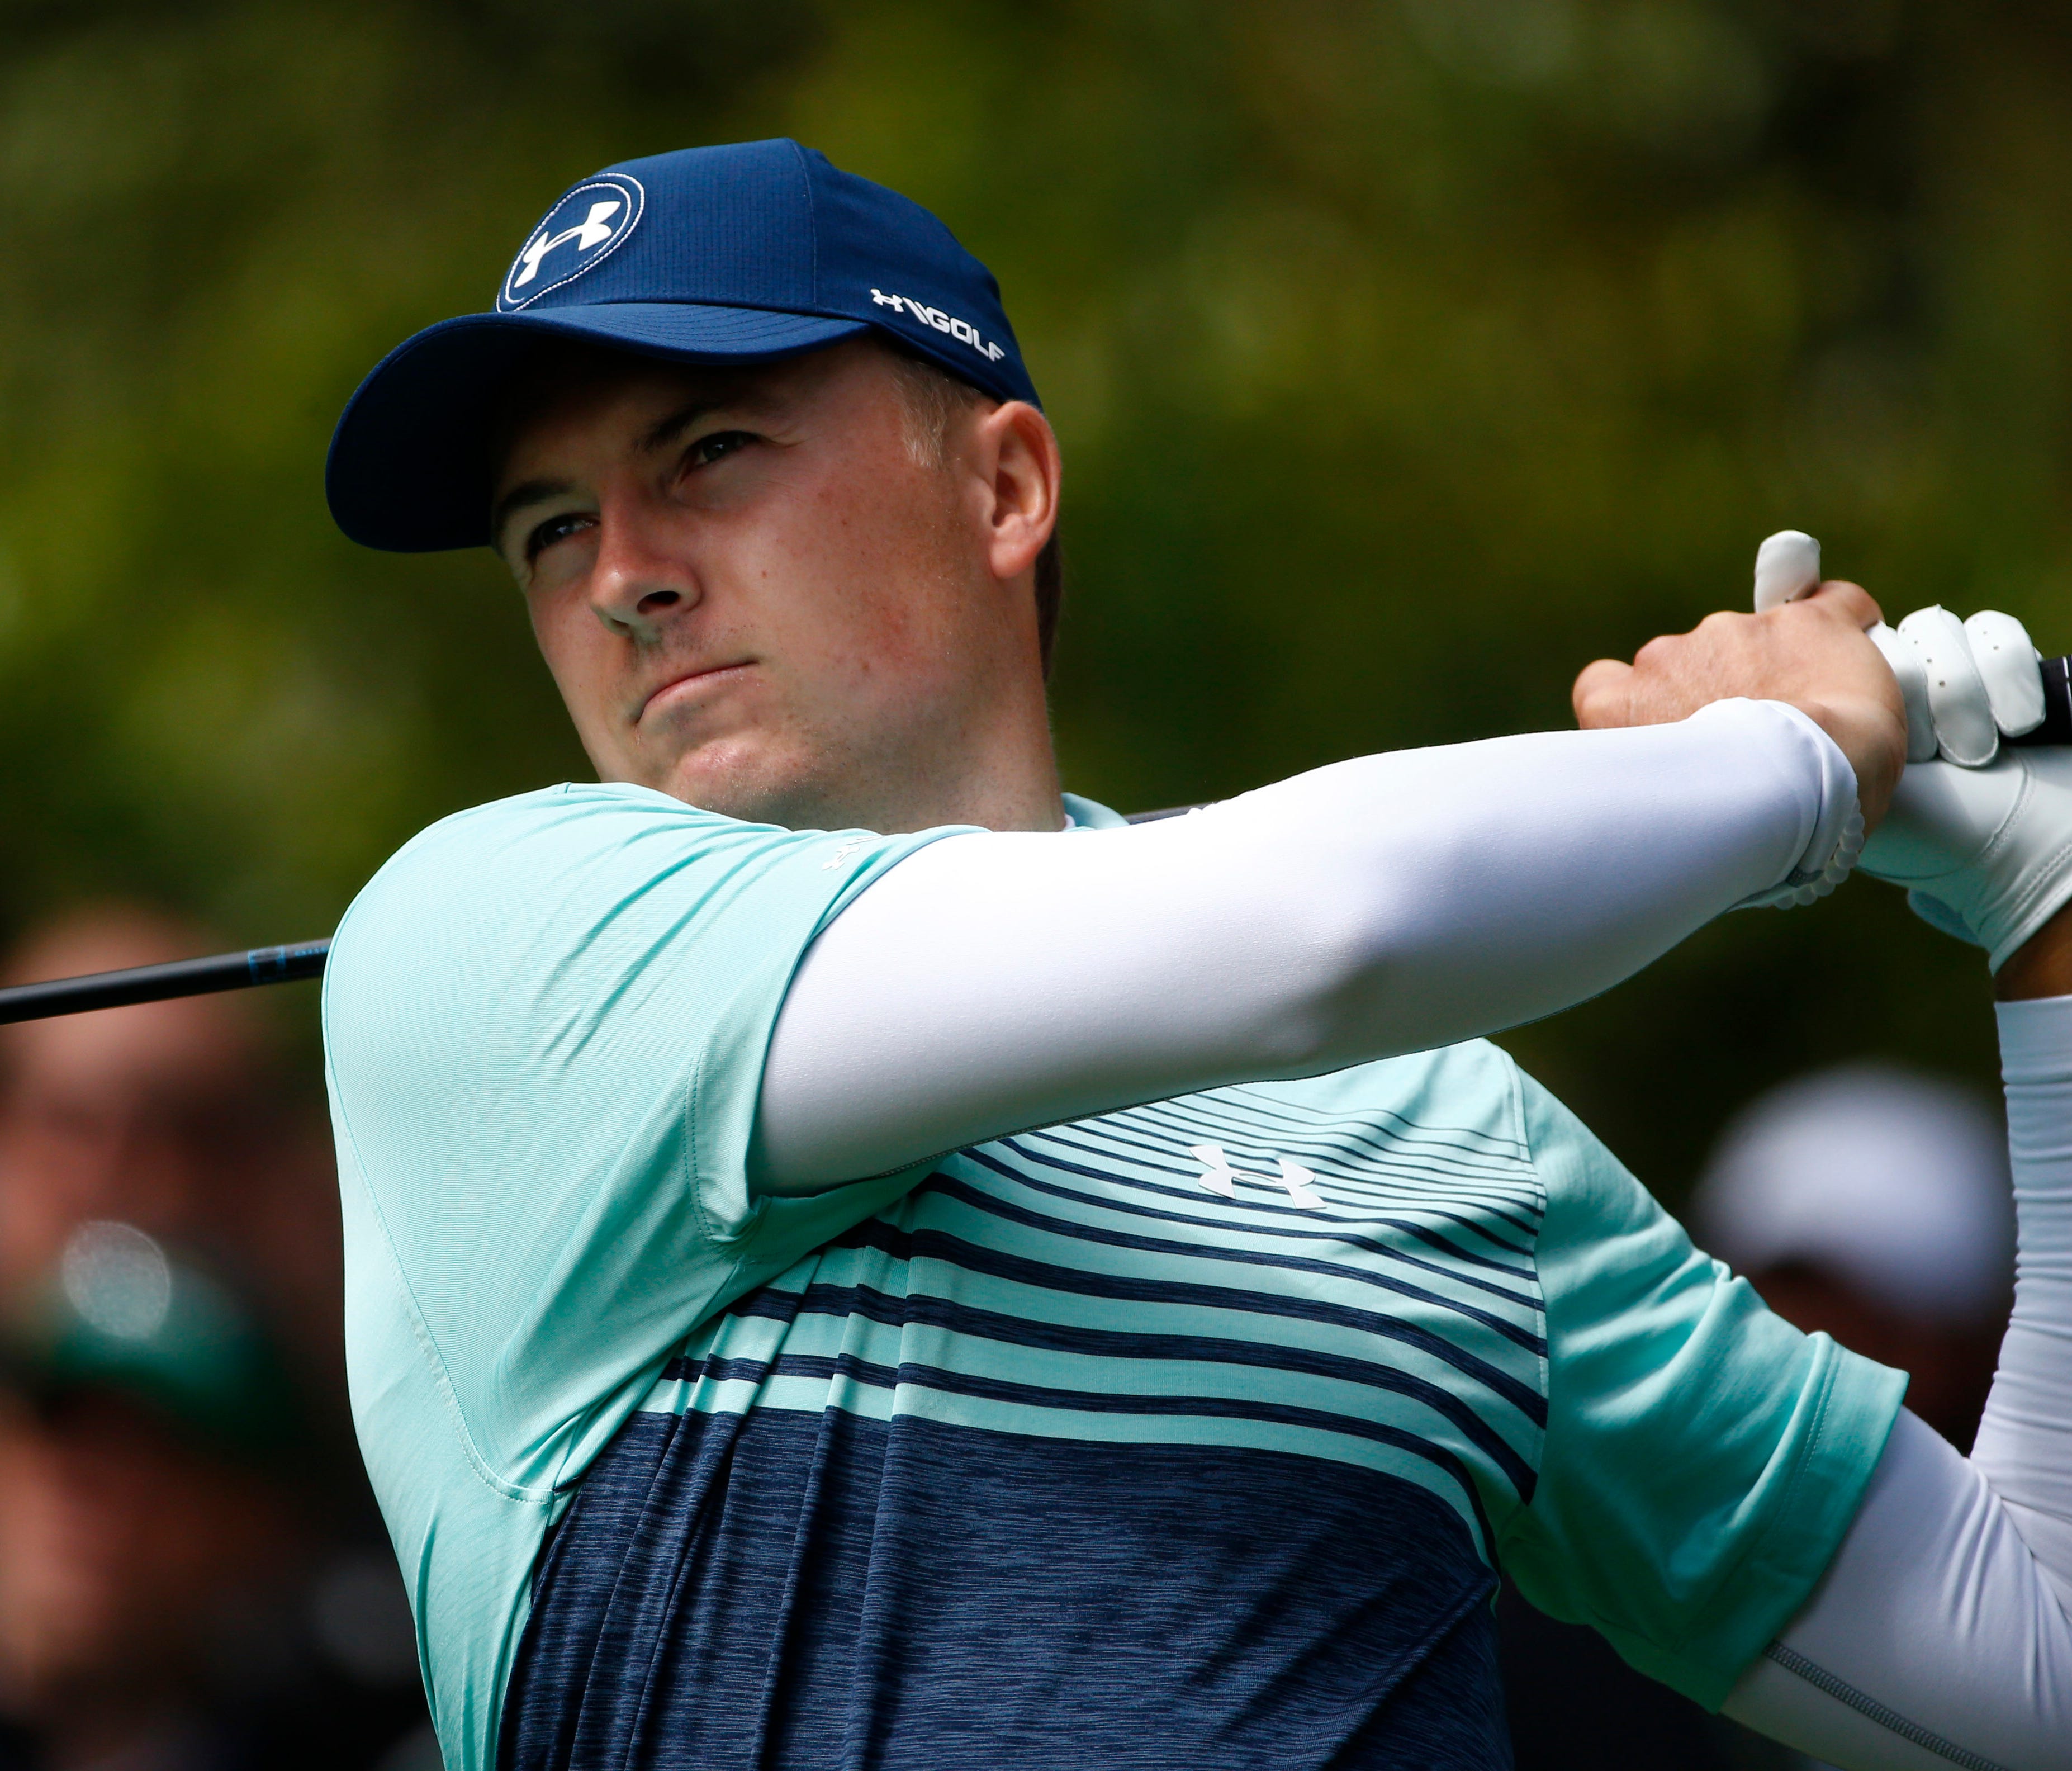 Jordan Spieth hits his tee shot on the 7th hole during the first round of the Masters at Augusta National Golf Club on April 6.